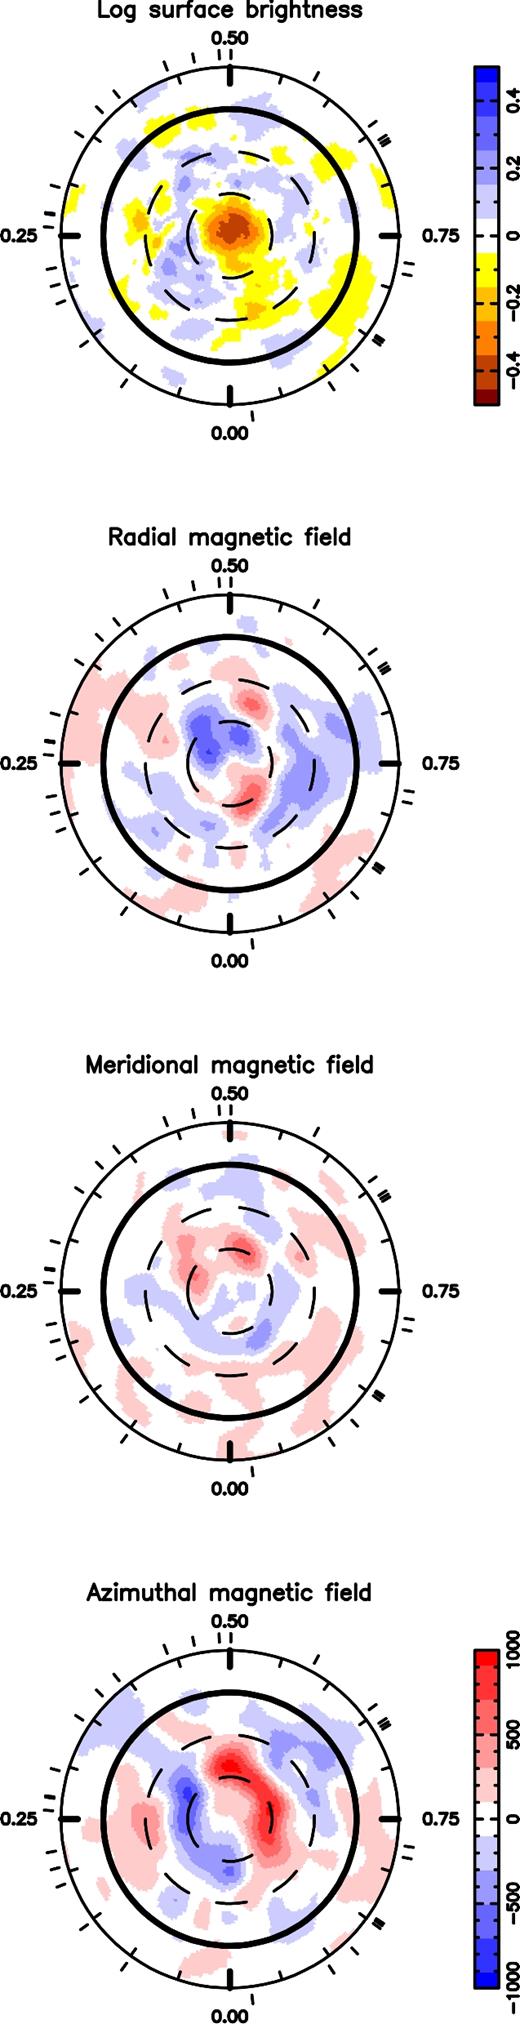 Brightness and magnetic components surface maps when fitting the 2015 November and 2016 January data sets altogether, at rotation cycle 51.